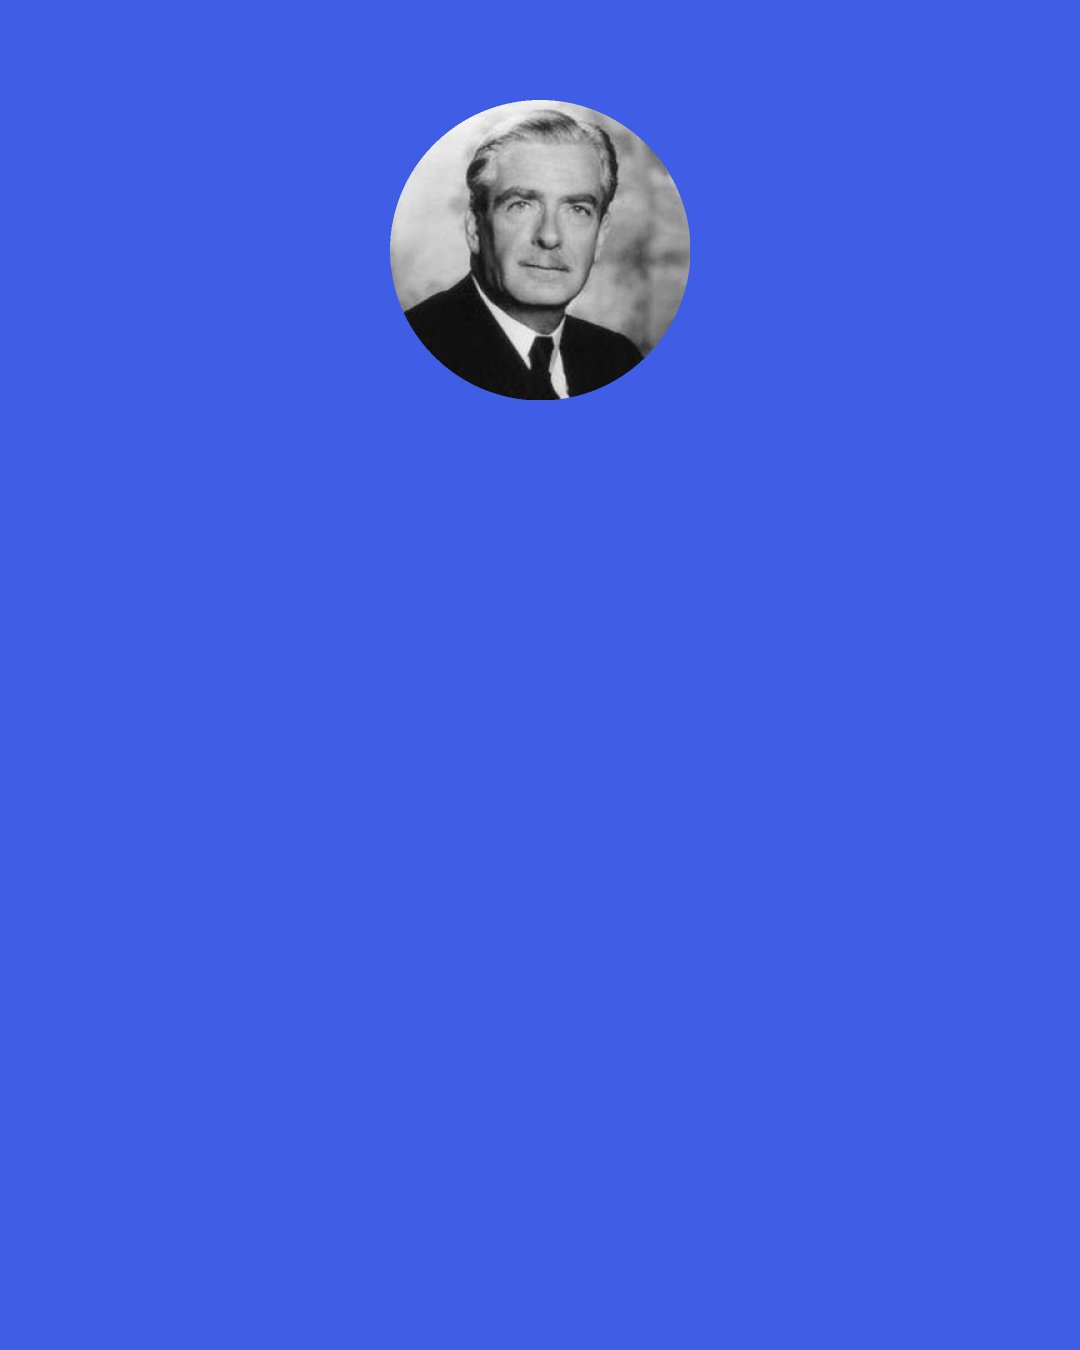 Anthony Eden: Responding to the question "If Mr. Stalin dies, what will be the effect on international affairs?" That is a good question for you to ask, not a wise question for me to answer.